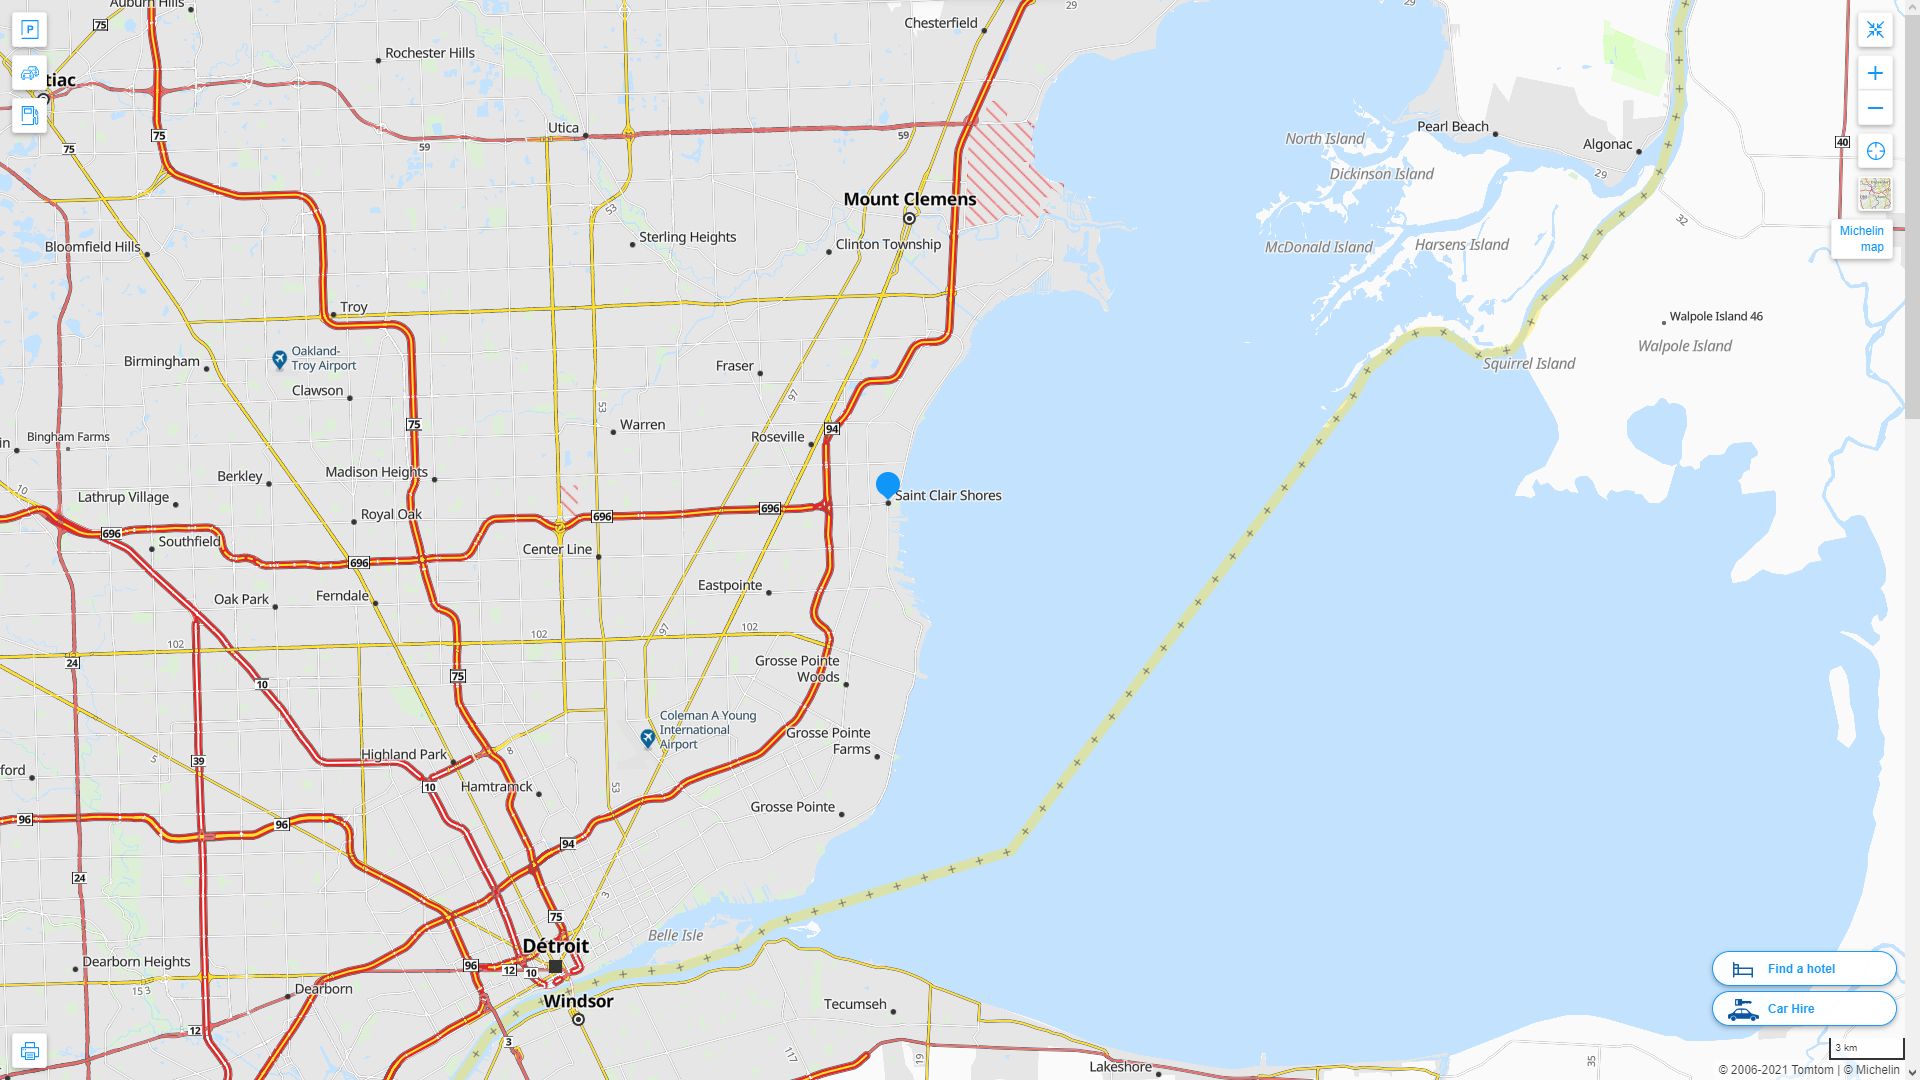 St. Clair Shores Michigan Highway and Road Map